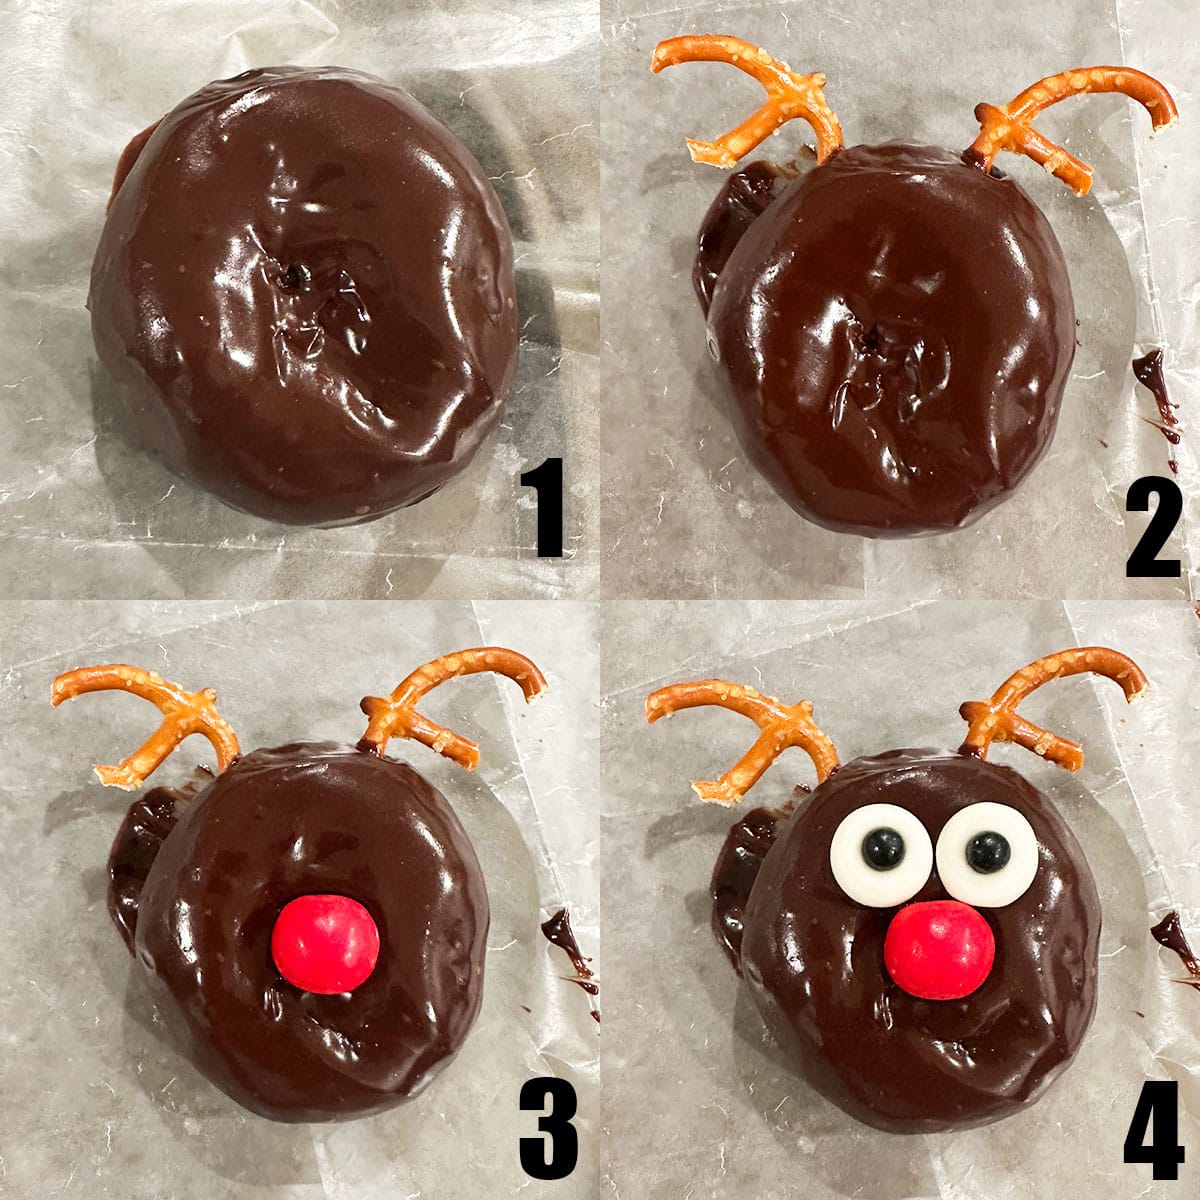 Collage Image With Step by Step Process Shots on How to Make Reindeer Donuts (Rudolph/Rudolf).